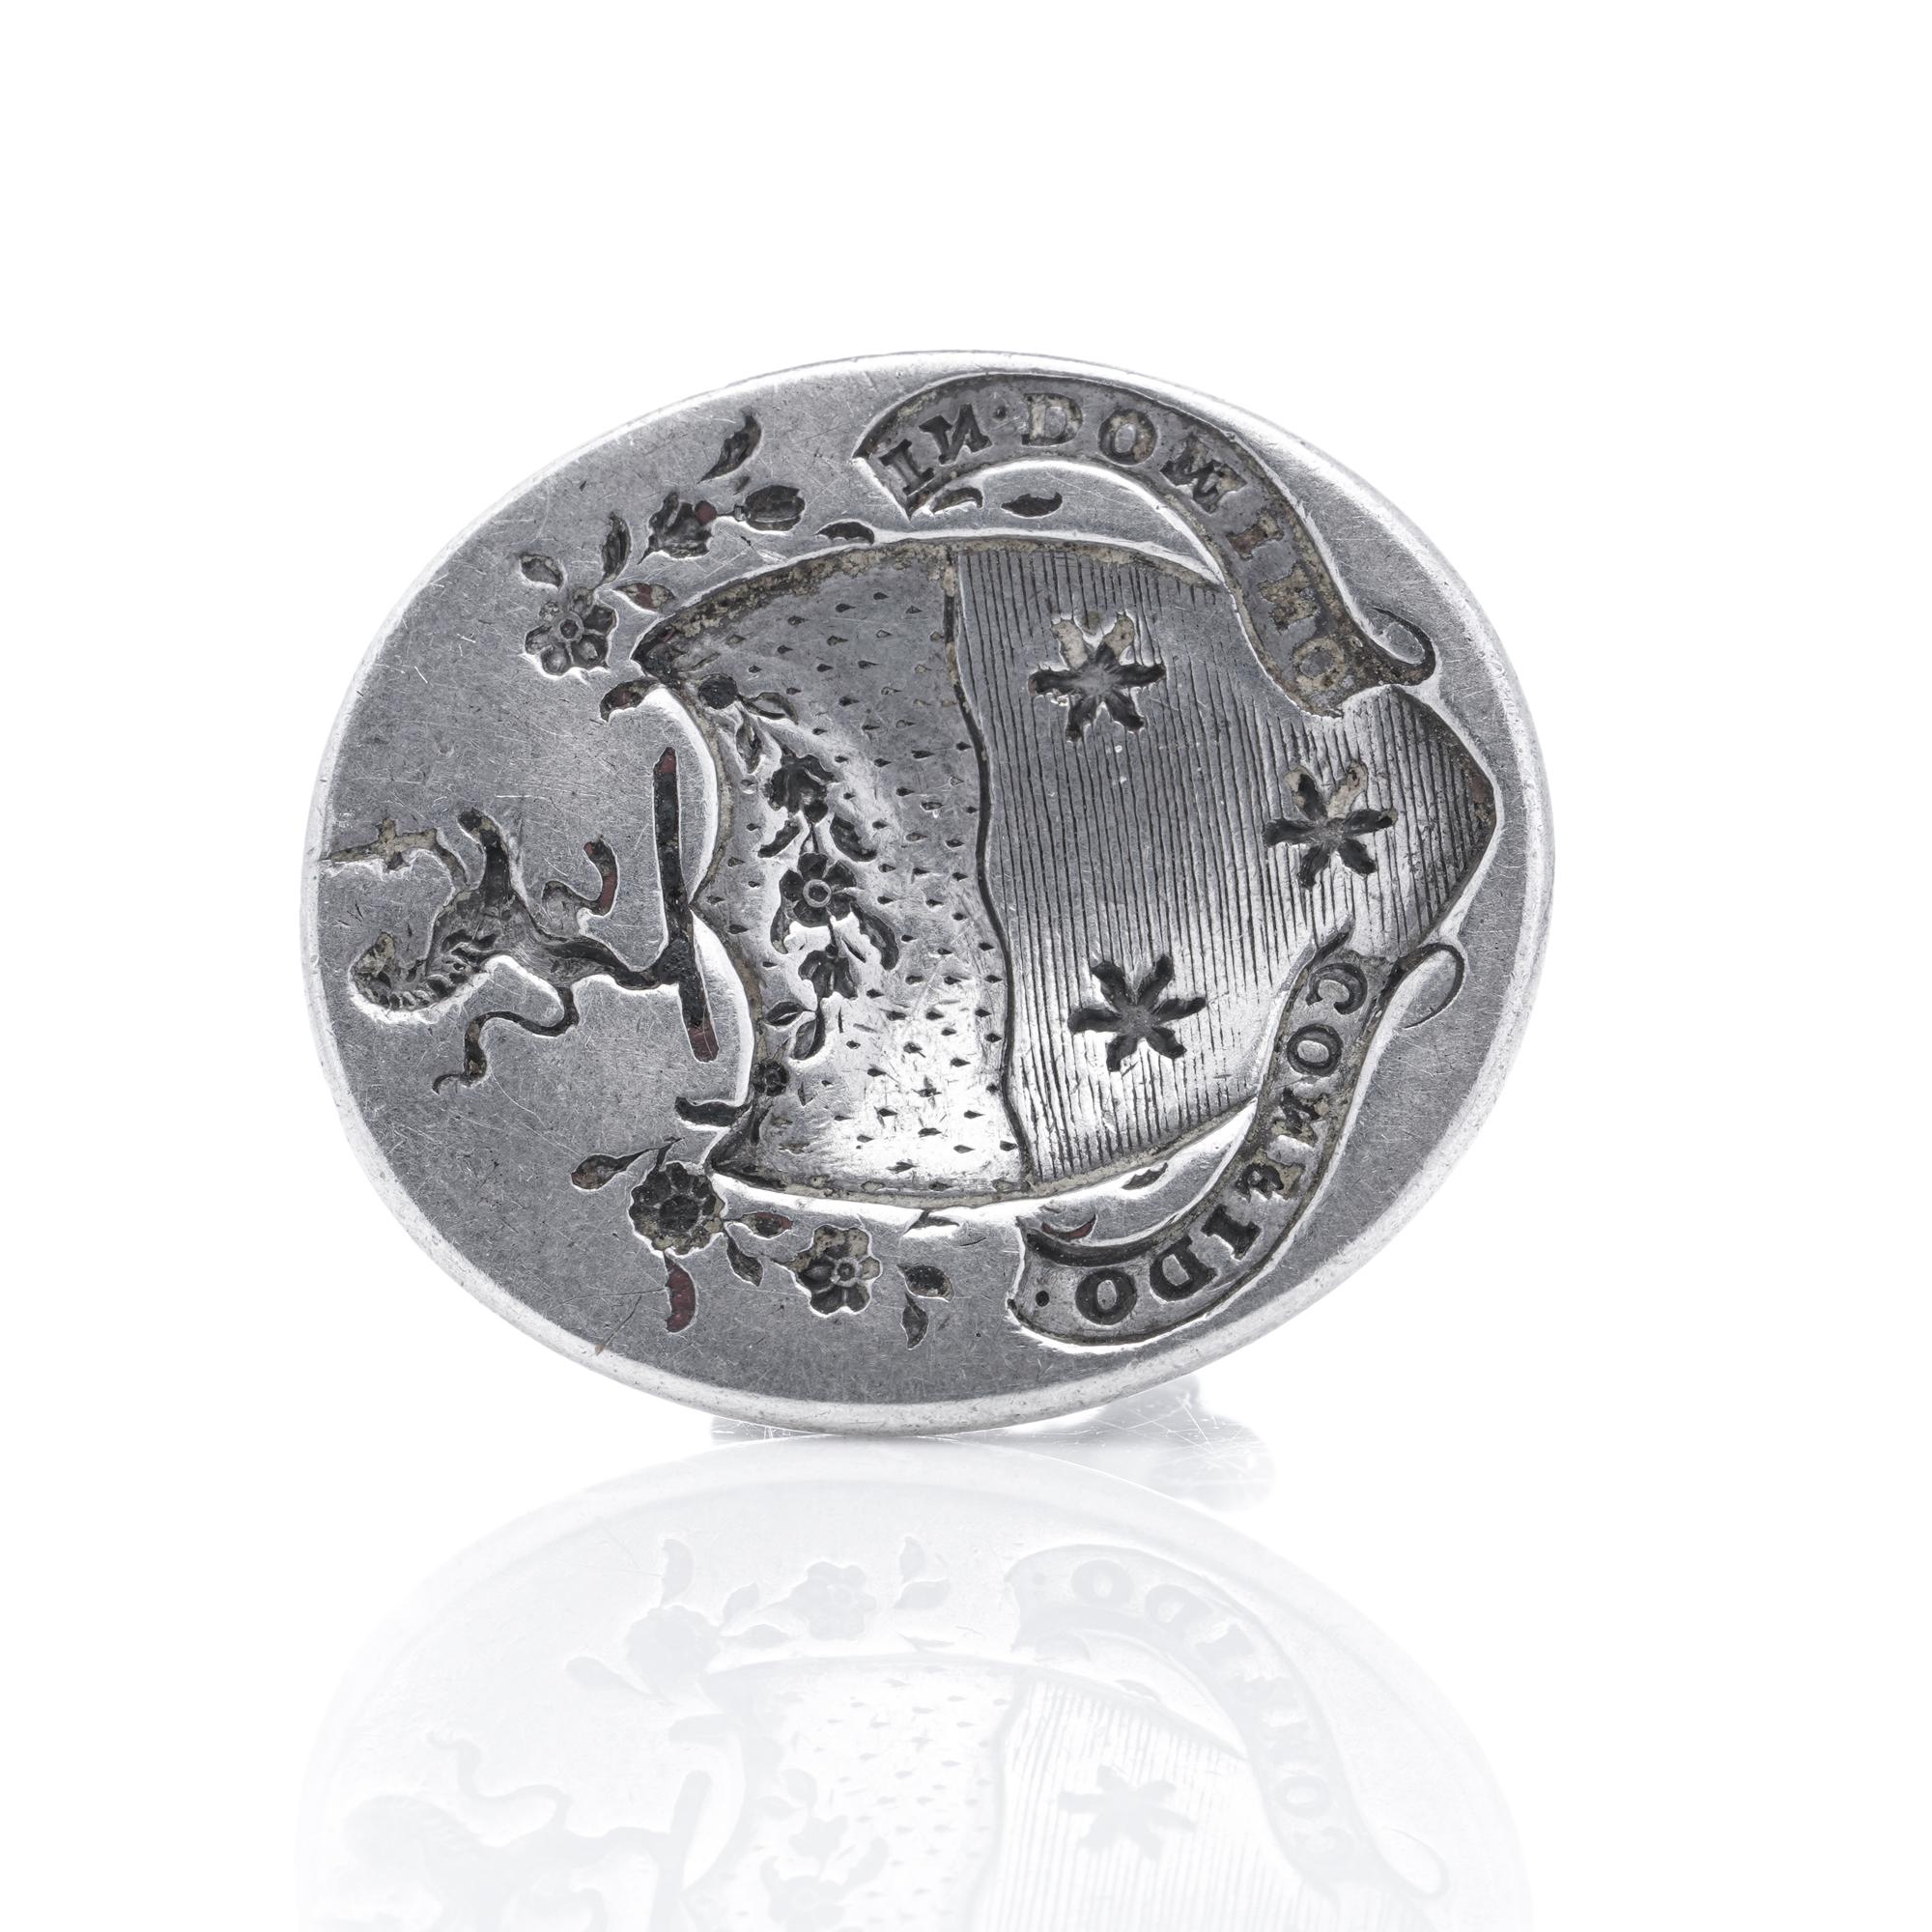 Introducing a remarkable piece: the Hester Bateman Georgian Silver Wax Seal. Adorned with the distinguished lion passant and HB markings, this seal stands at a height of 2.5 cm with a width of 1.8 cm and weighs 10 grams in total.

This is an